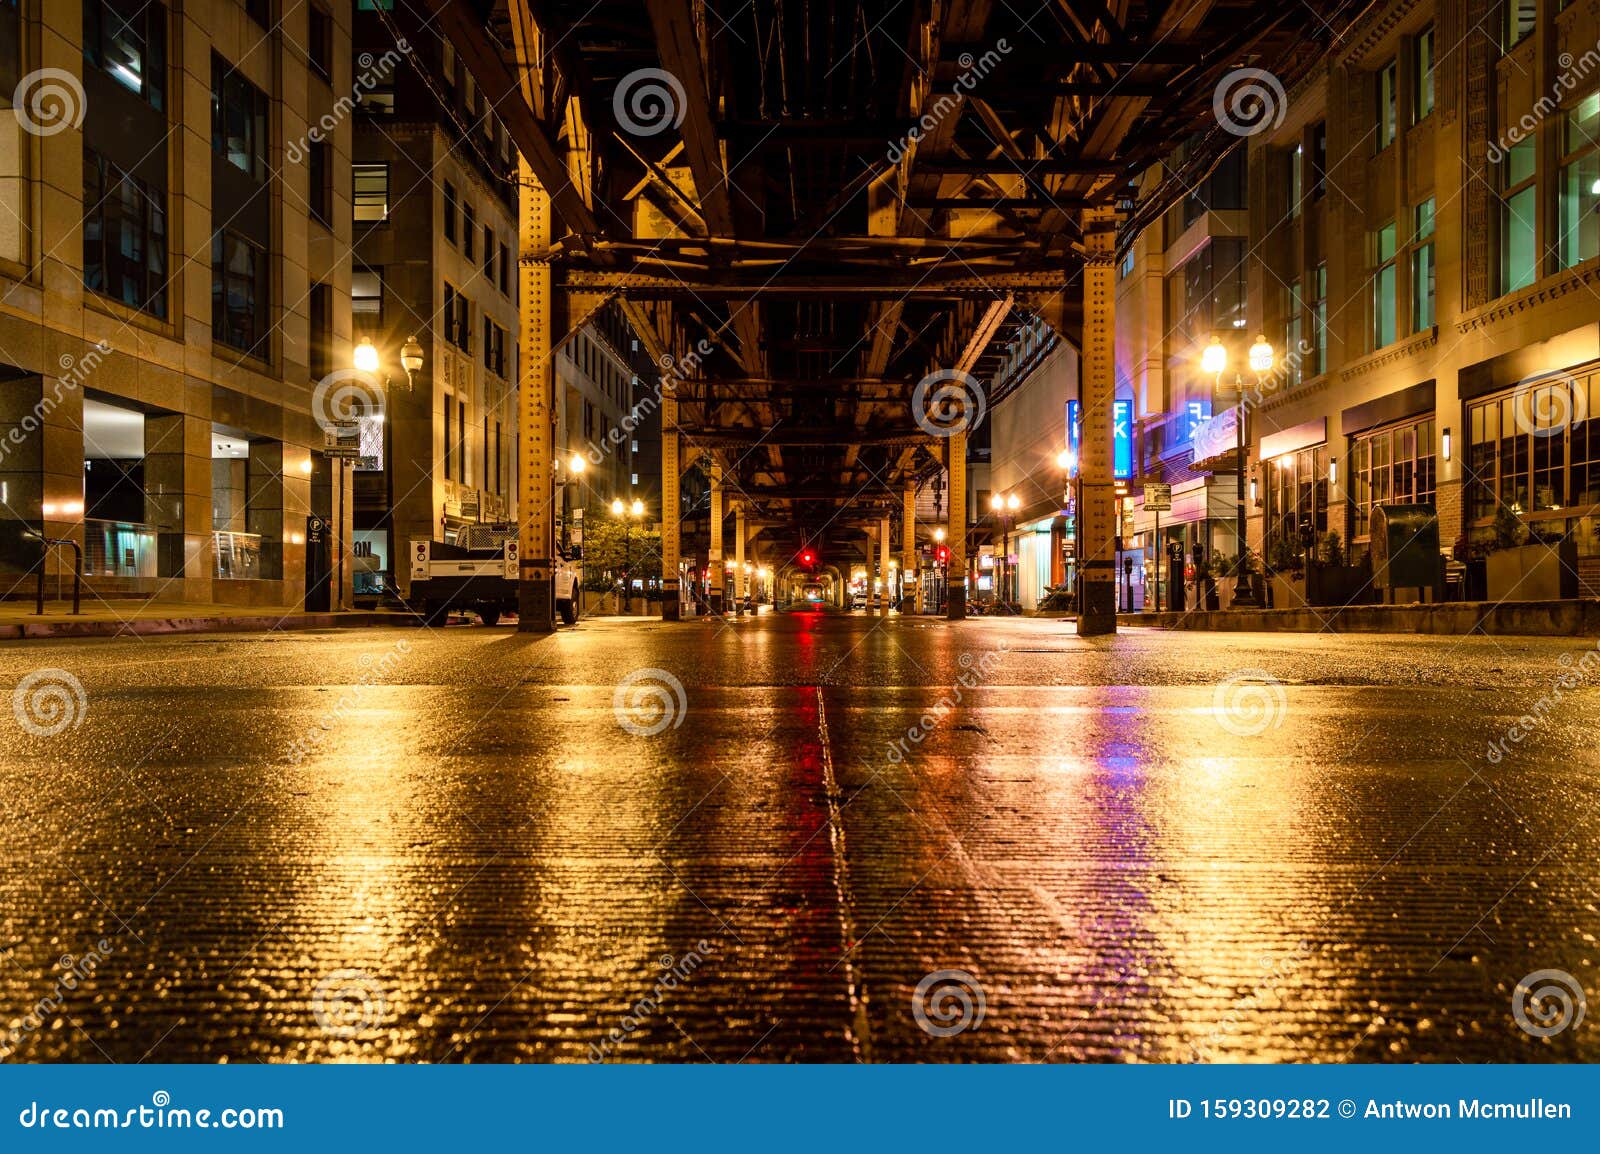 underneath the elevated train tracks in the chicago loop at night